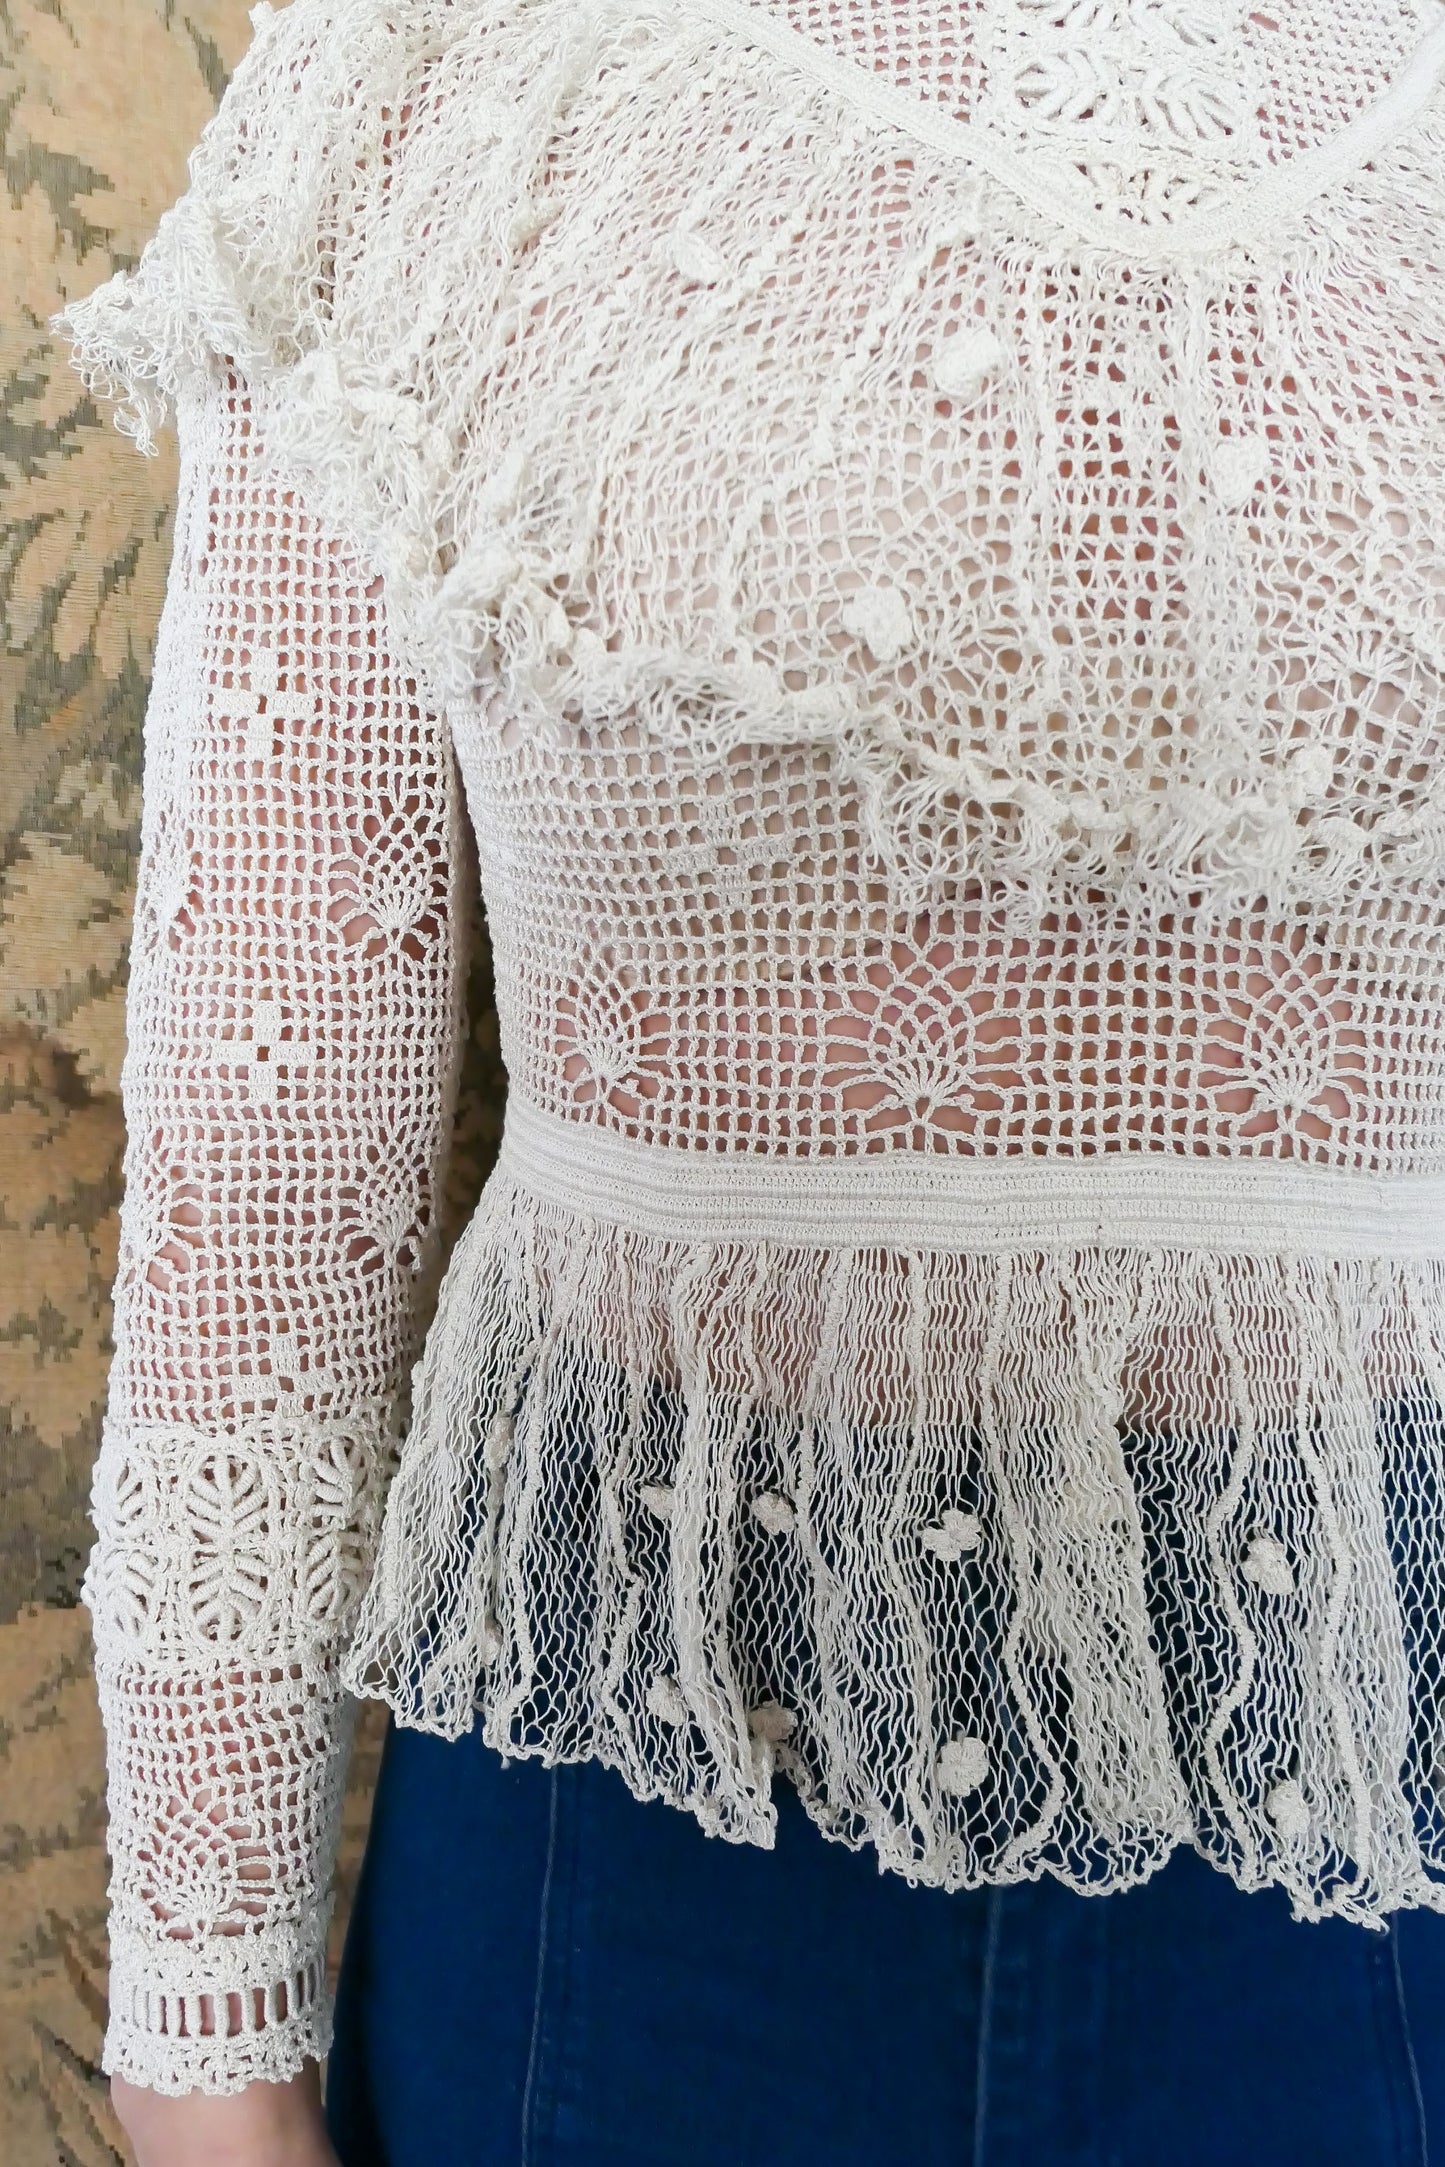 Closeup view of ruffled flared bottom hem of top made with sheer fishnet-like crochet material..  Waist is fitted.  